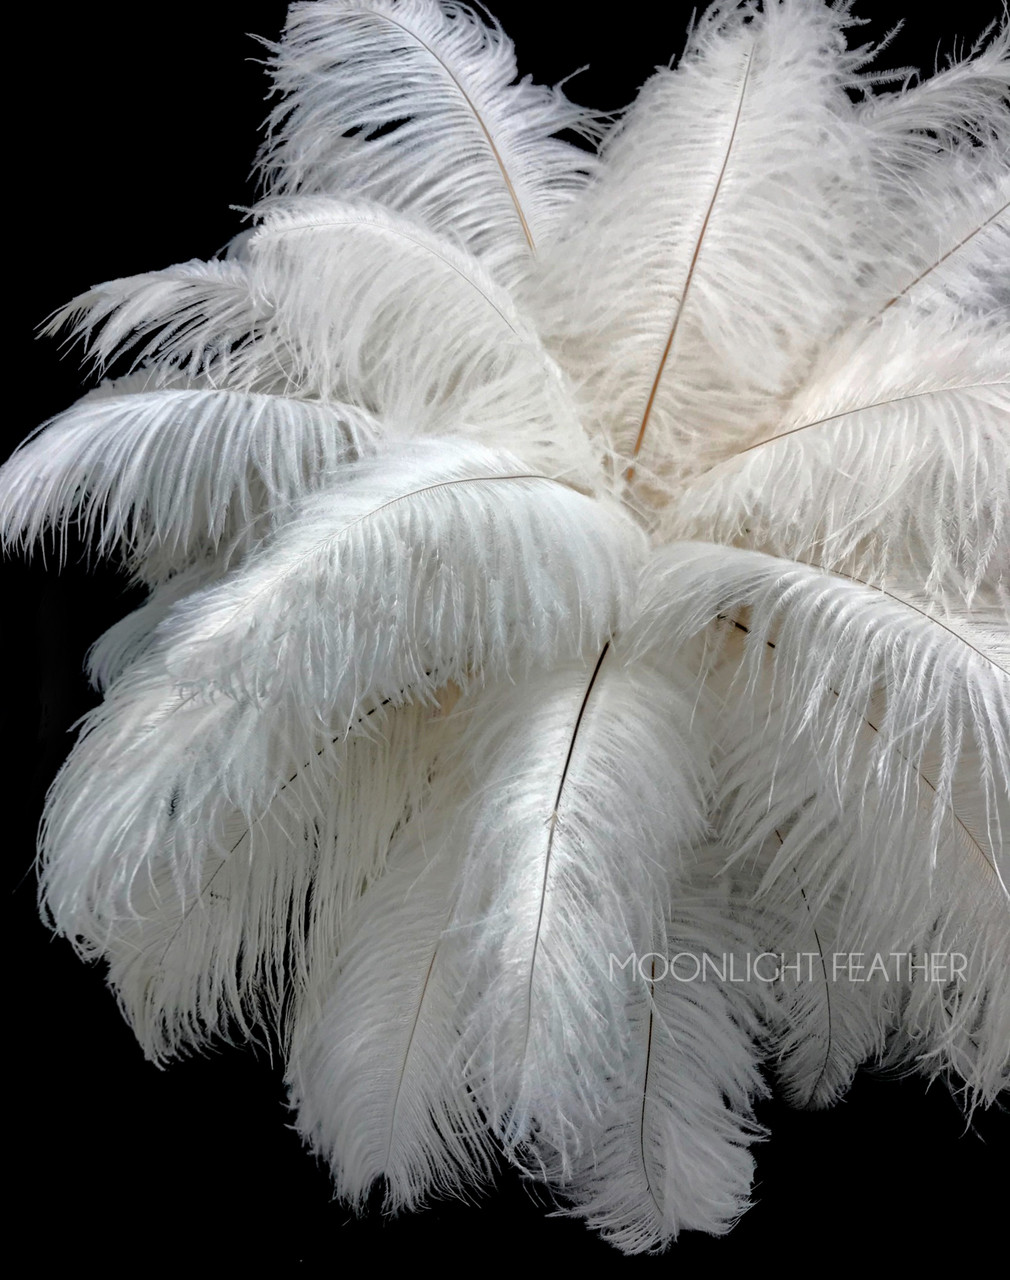 12pcs Natural White Ostrich Feathers Plumes 10-12inch(25-30cm) Bulk for  Wedding Party Centerpieces Easter